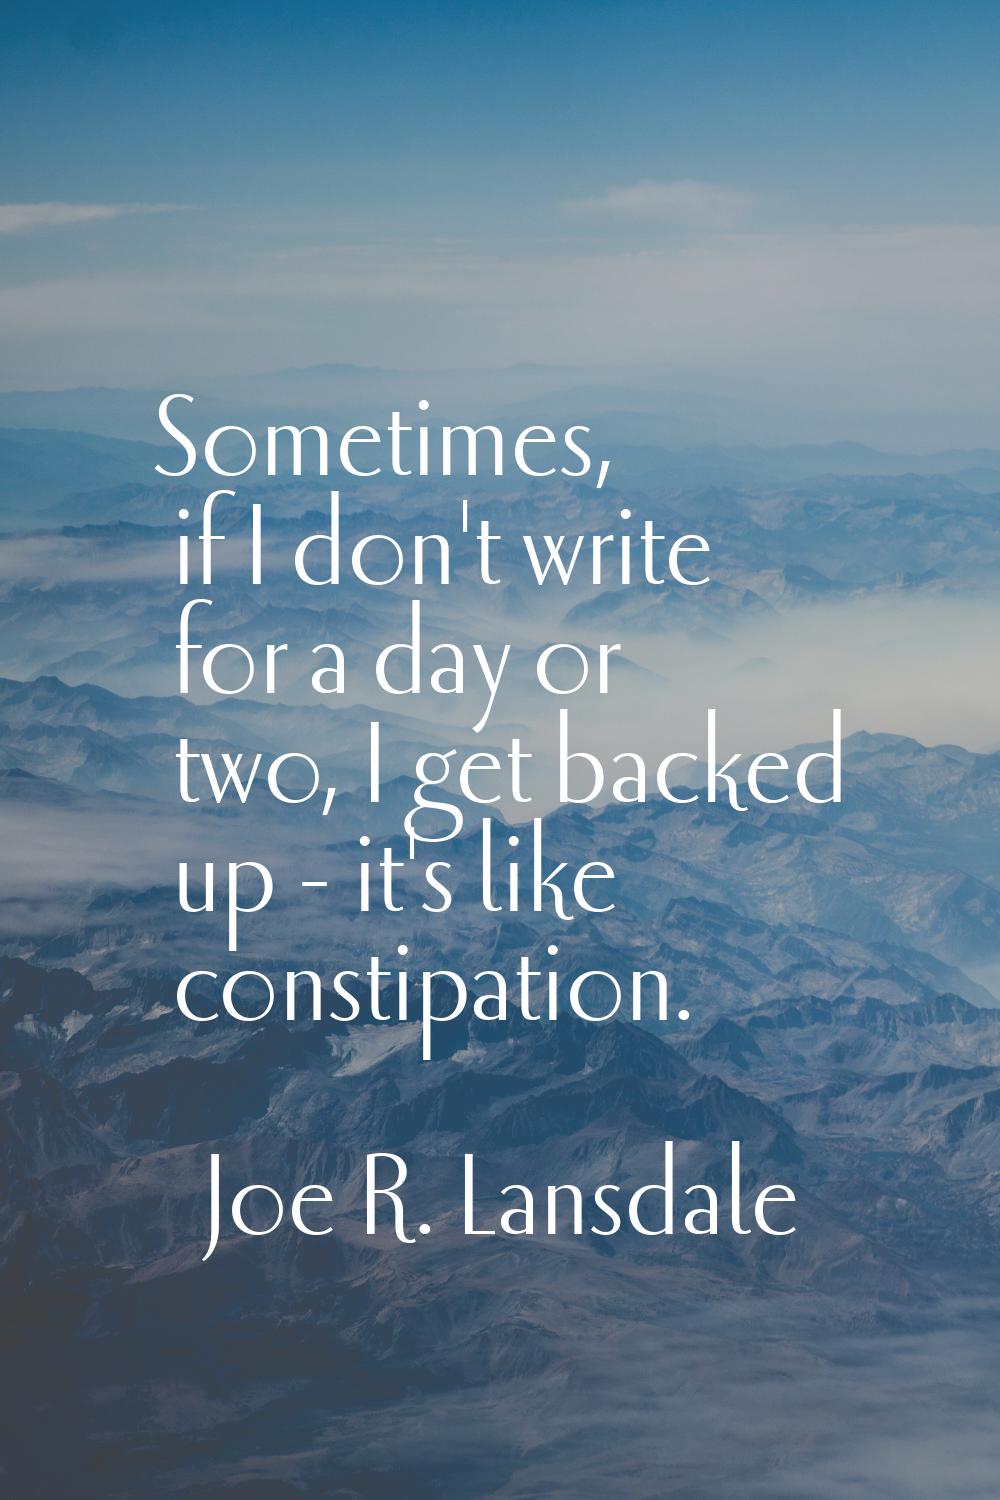 Sometimes, if I don't write for a day or two, I get backed up - it's like constipation.